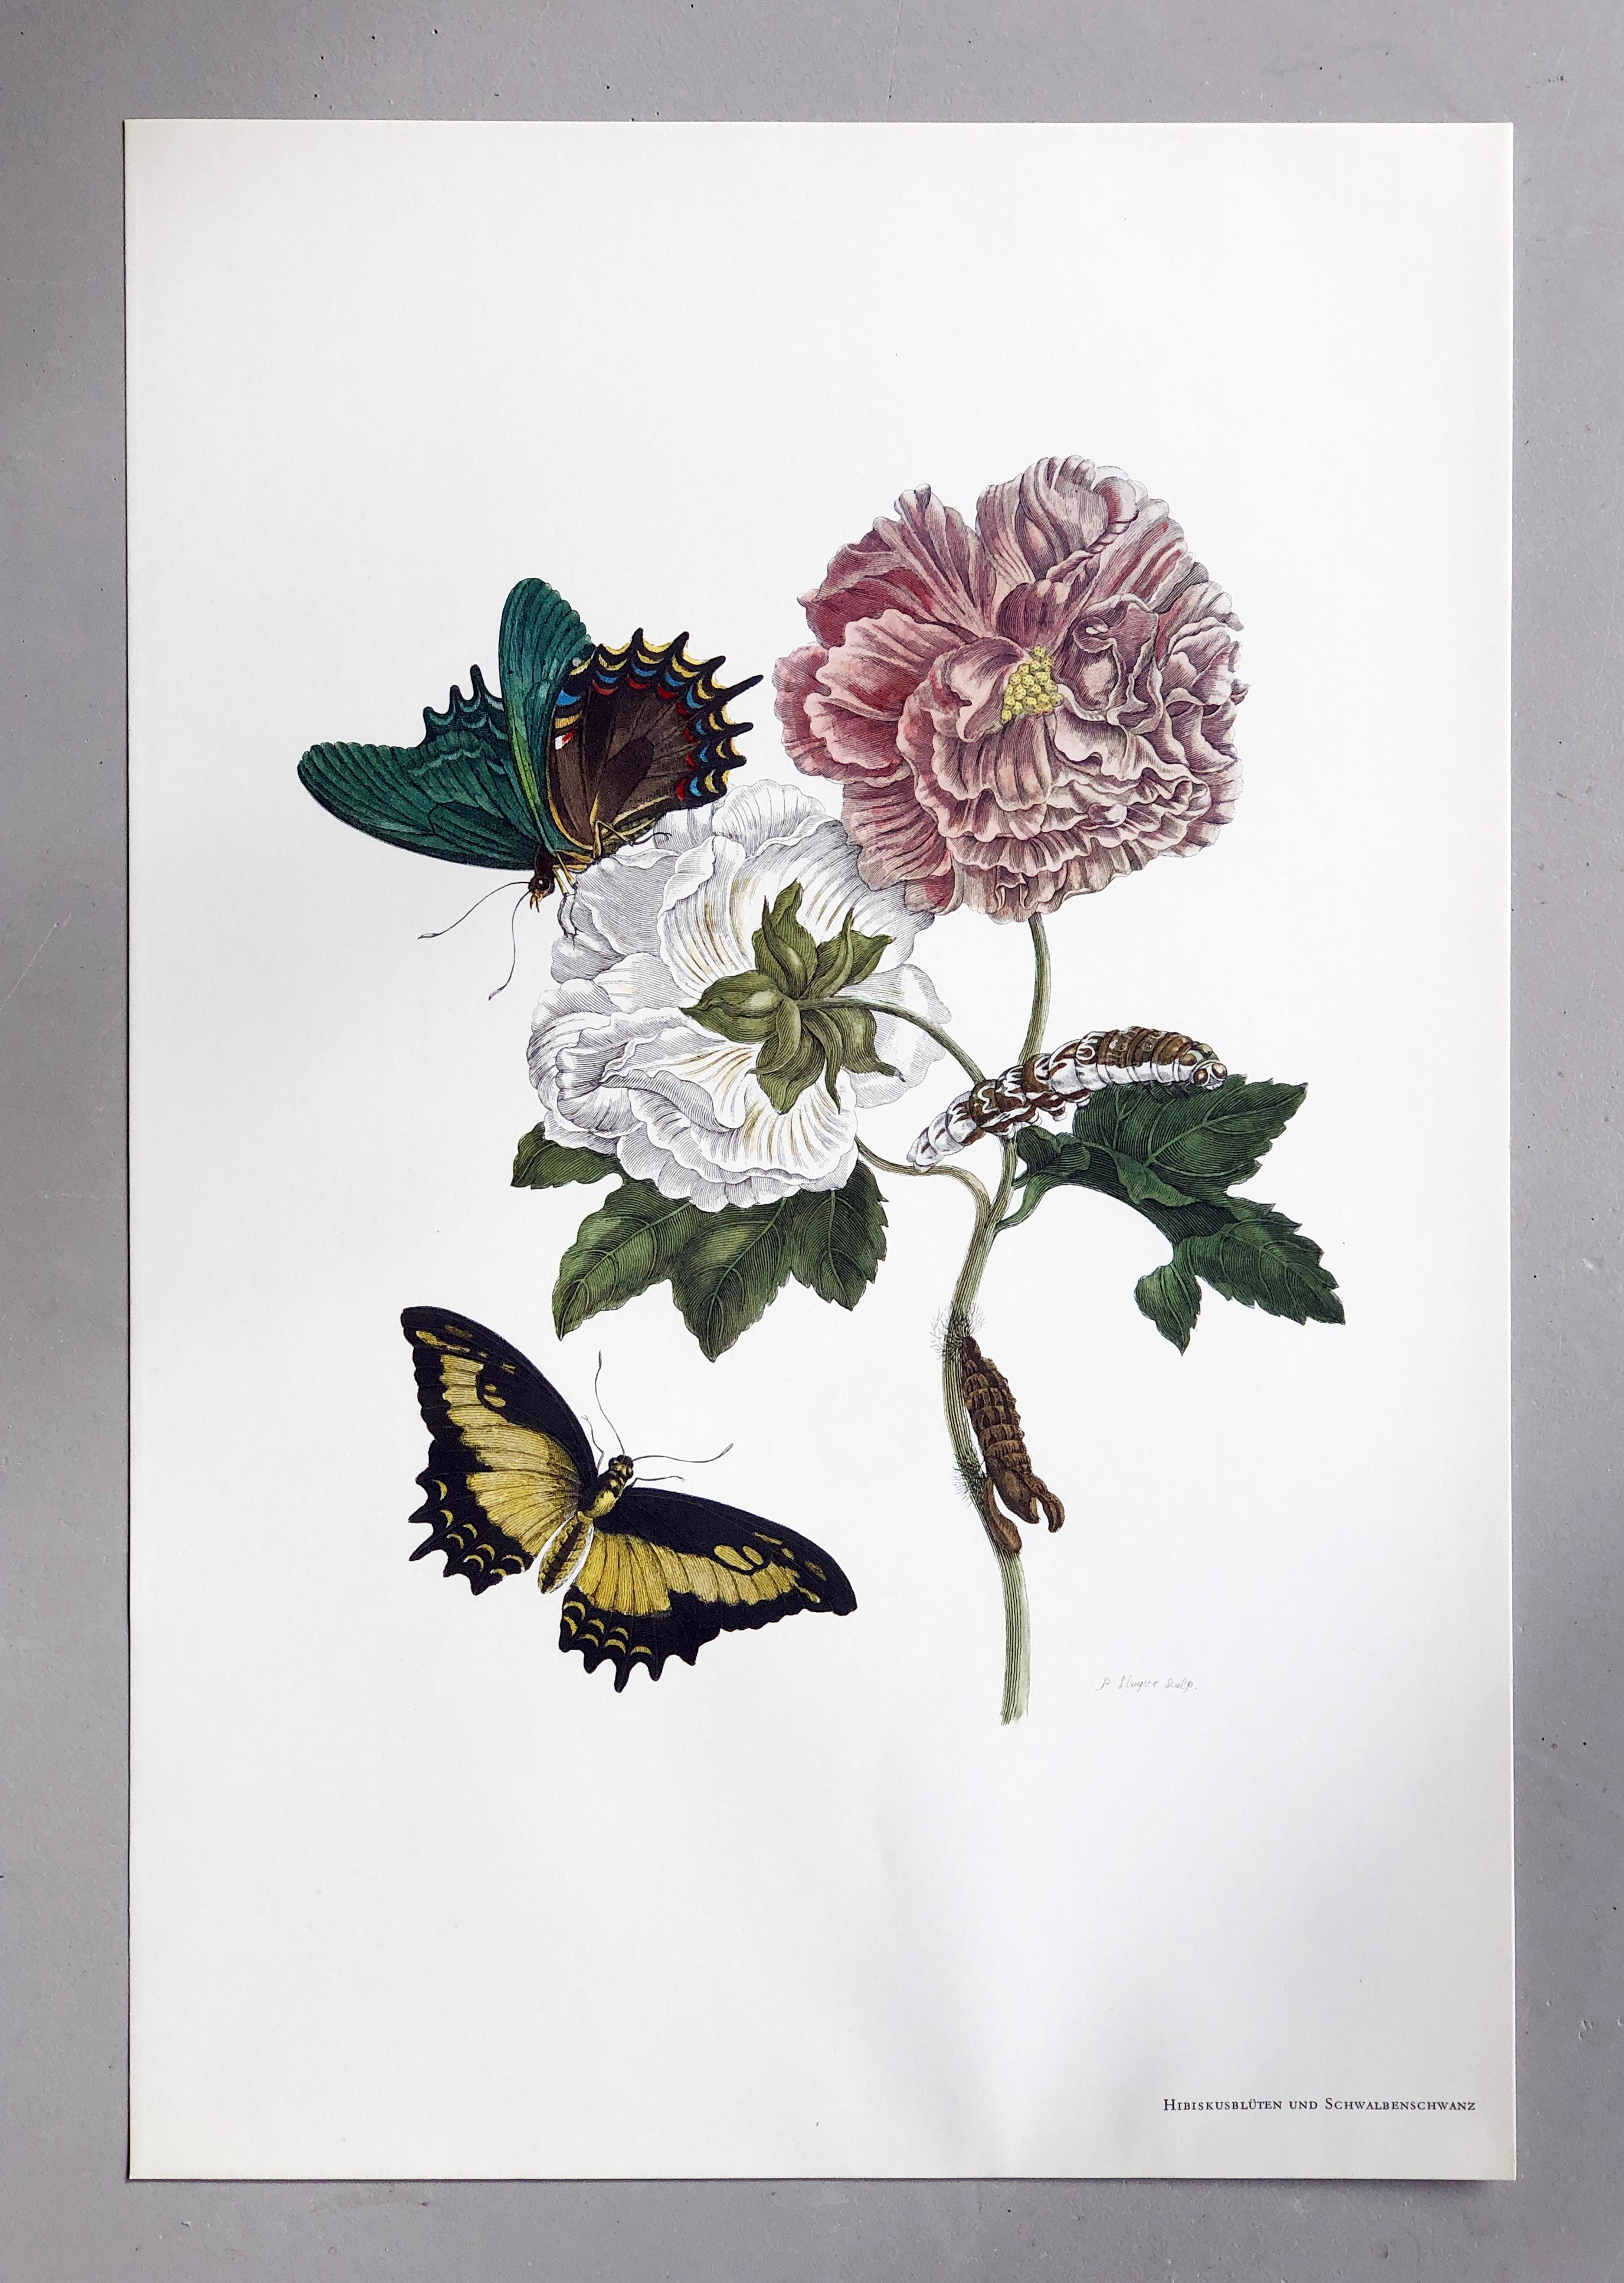 Other Maria Sibylla Merian - P. Sluyter - Hibiscus flowers and swallowtail Nr.31 For Sale